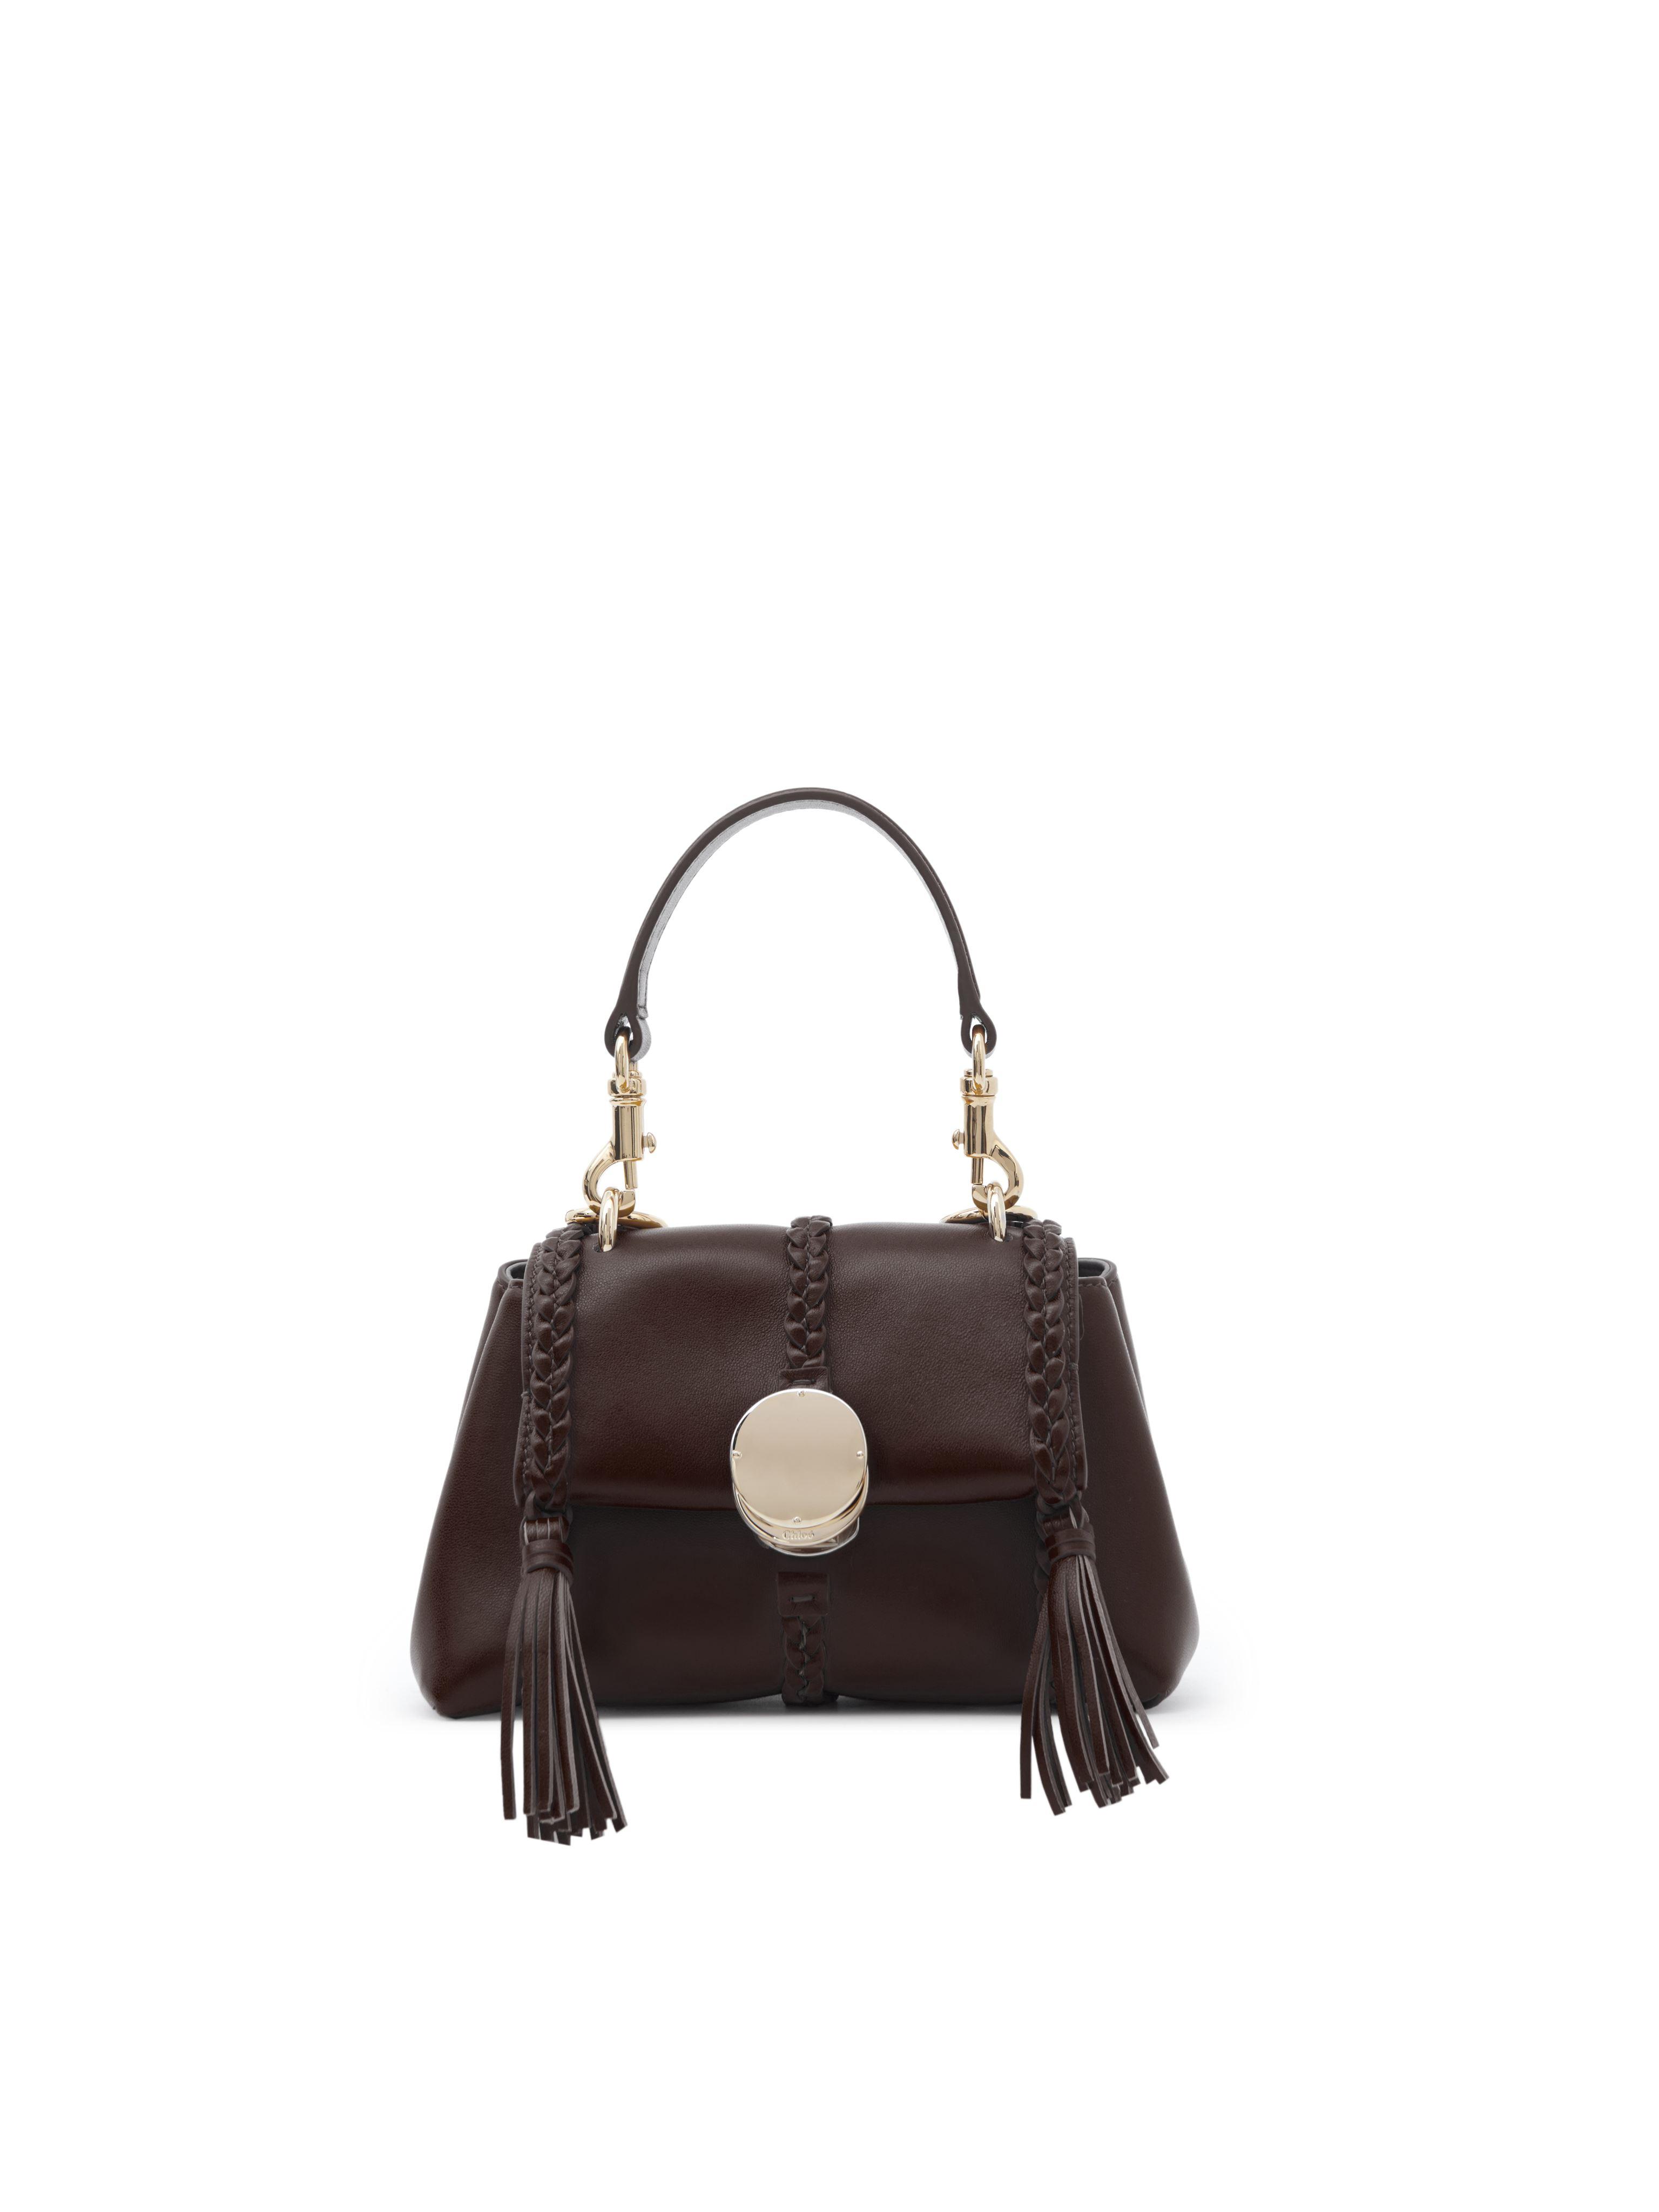 Chloé + Net Sustain Penelope Leather Clutch - Brown - One Size